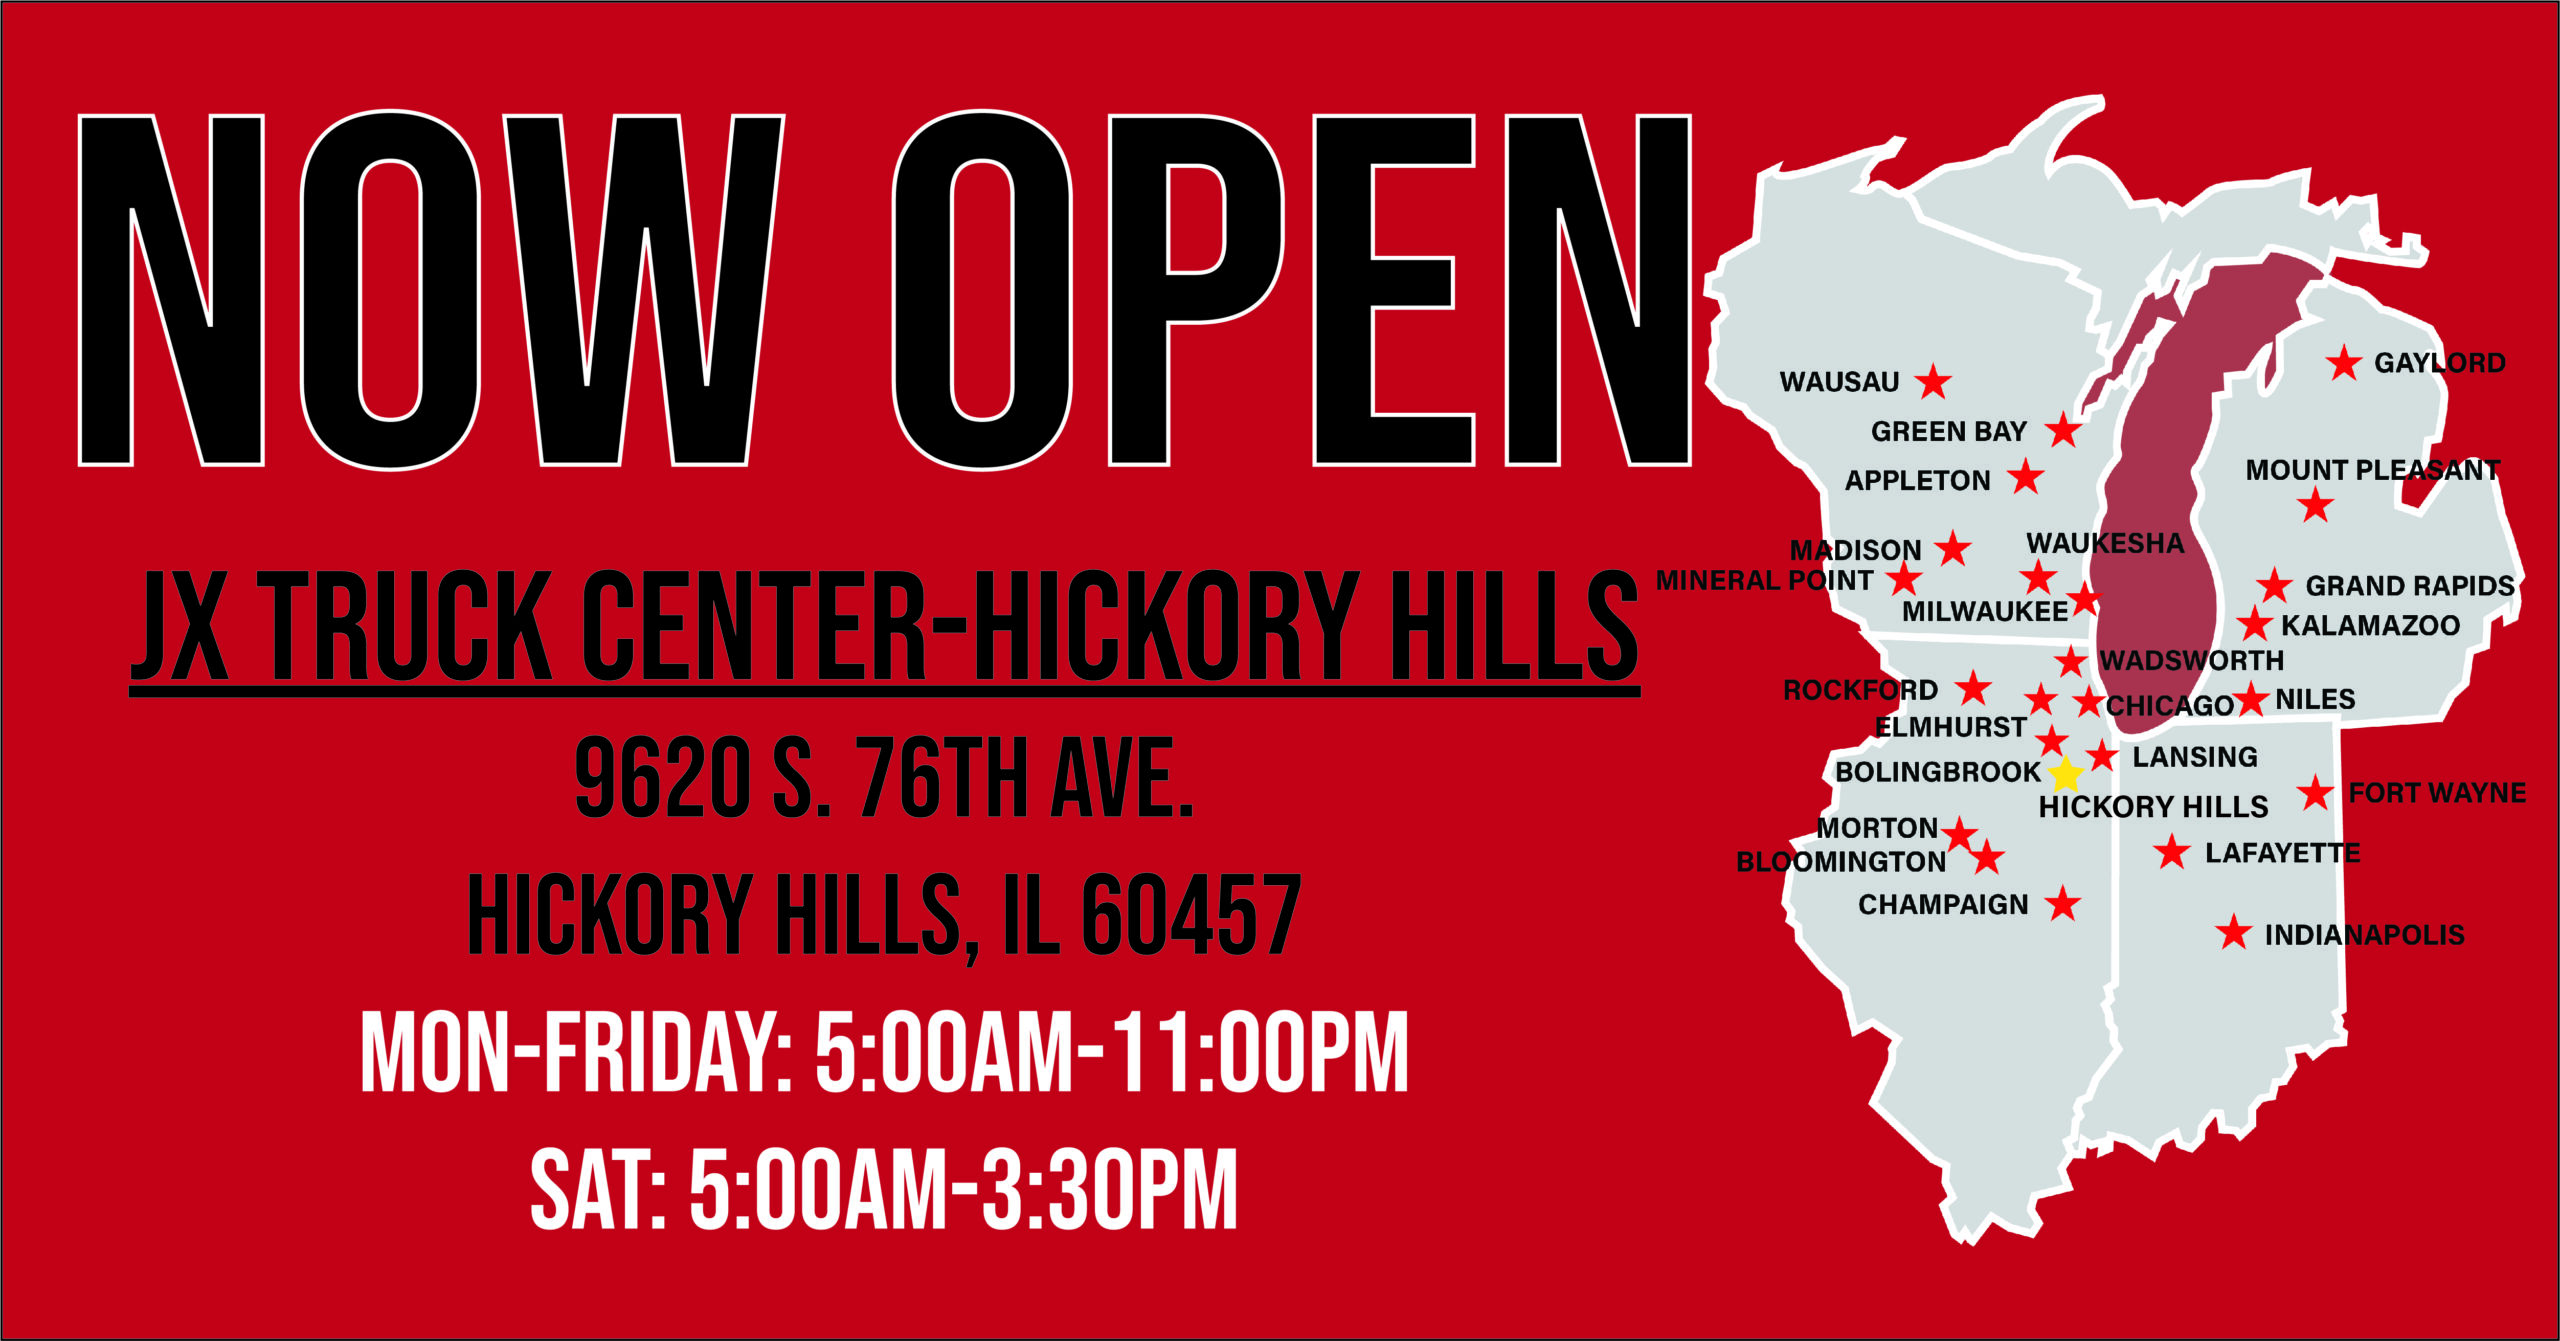 hickory hills location now open sign with map posted